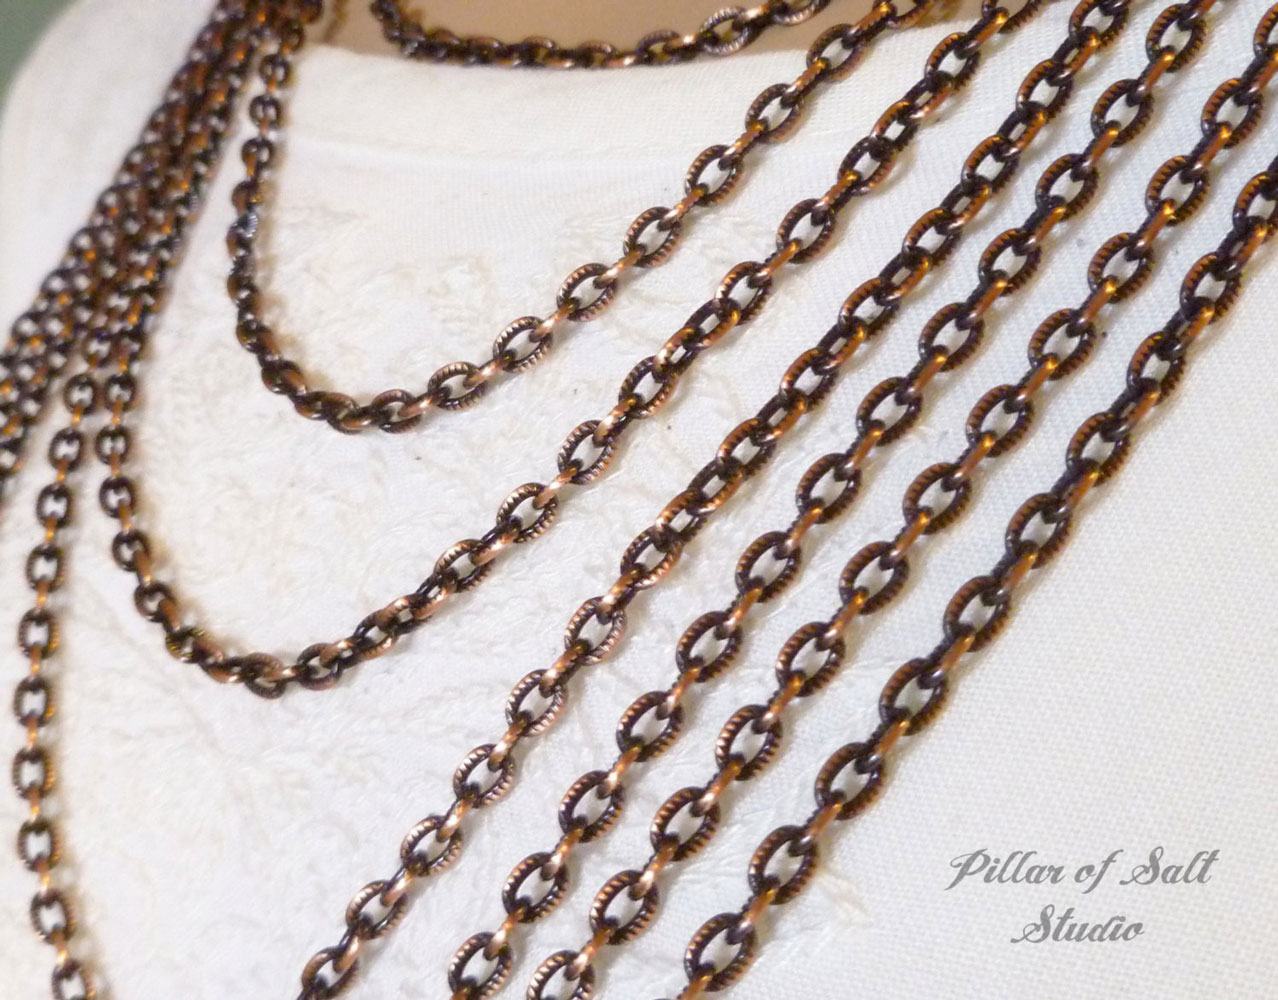 Solid Copper Chain necklace - Great 